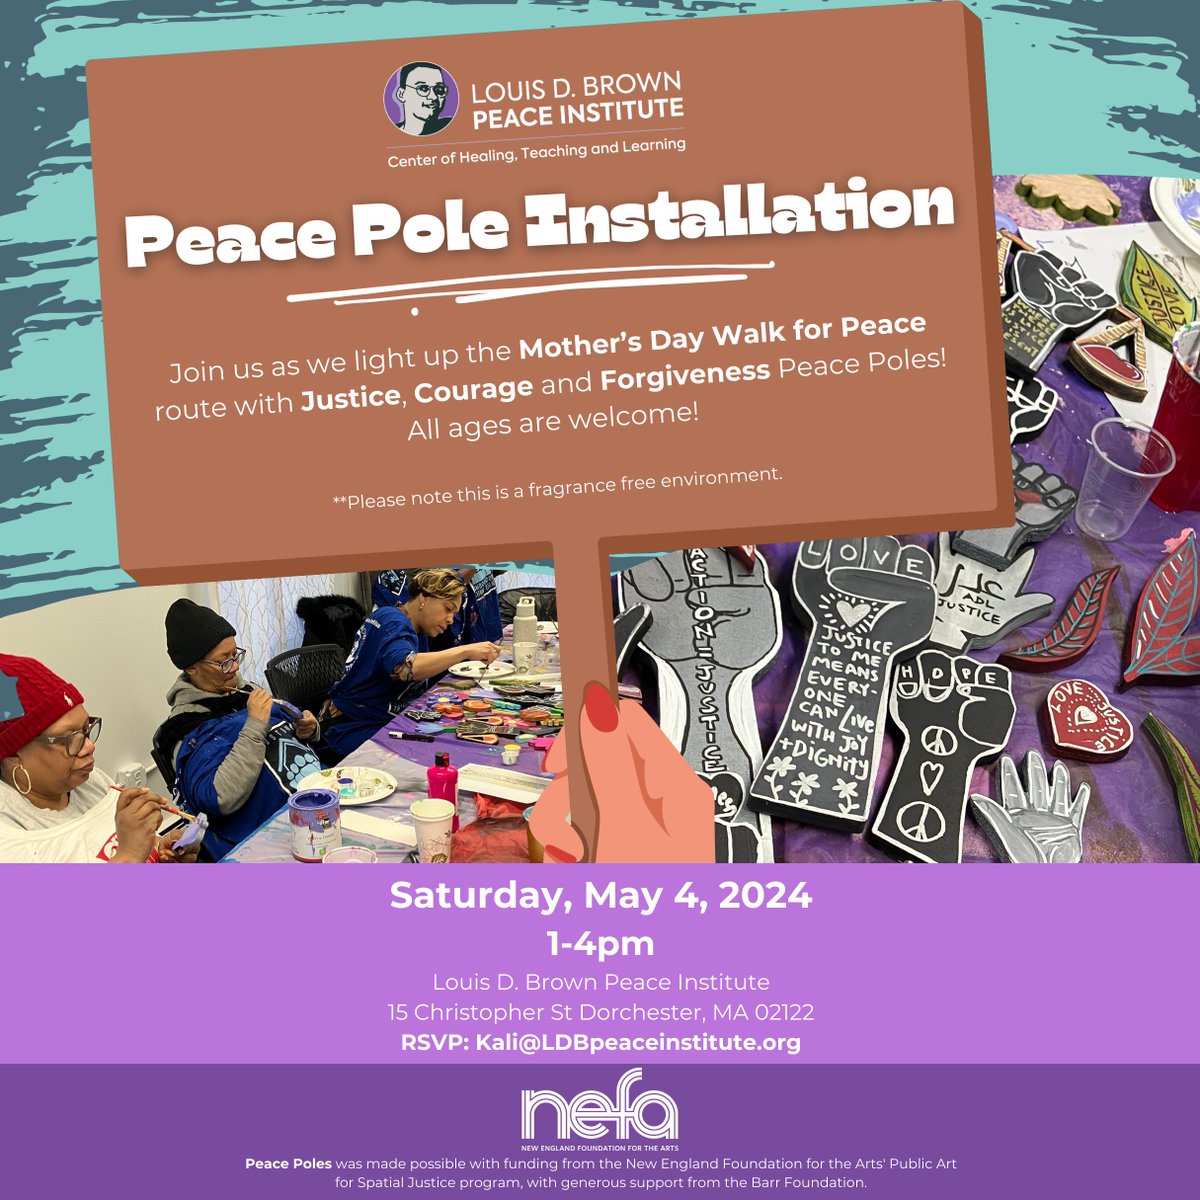 Join us on Saturday for the installation of our Justice, Courage, and Forgiveness Peace Poles! All ages welcome! This opportunity is supported by the New England Foundation for the Arts’ Collective Imagination for Spatial Justice program, with funding from the Barr Foundation